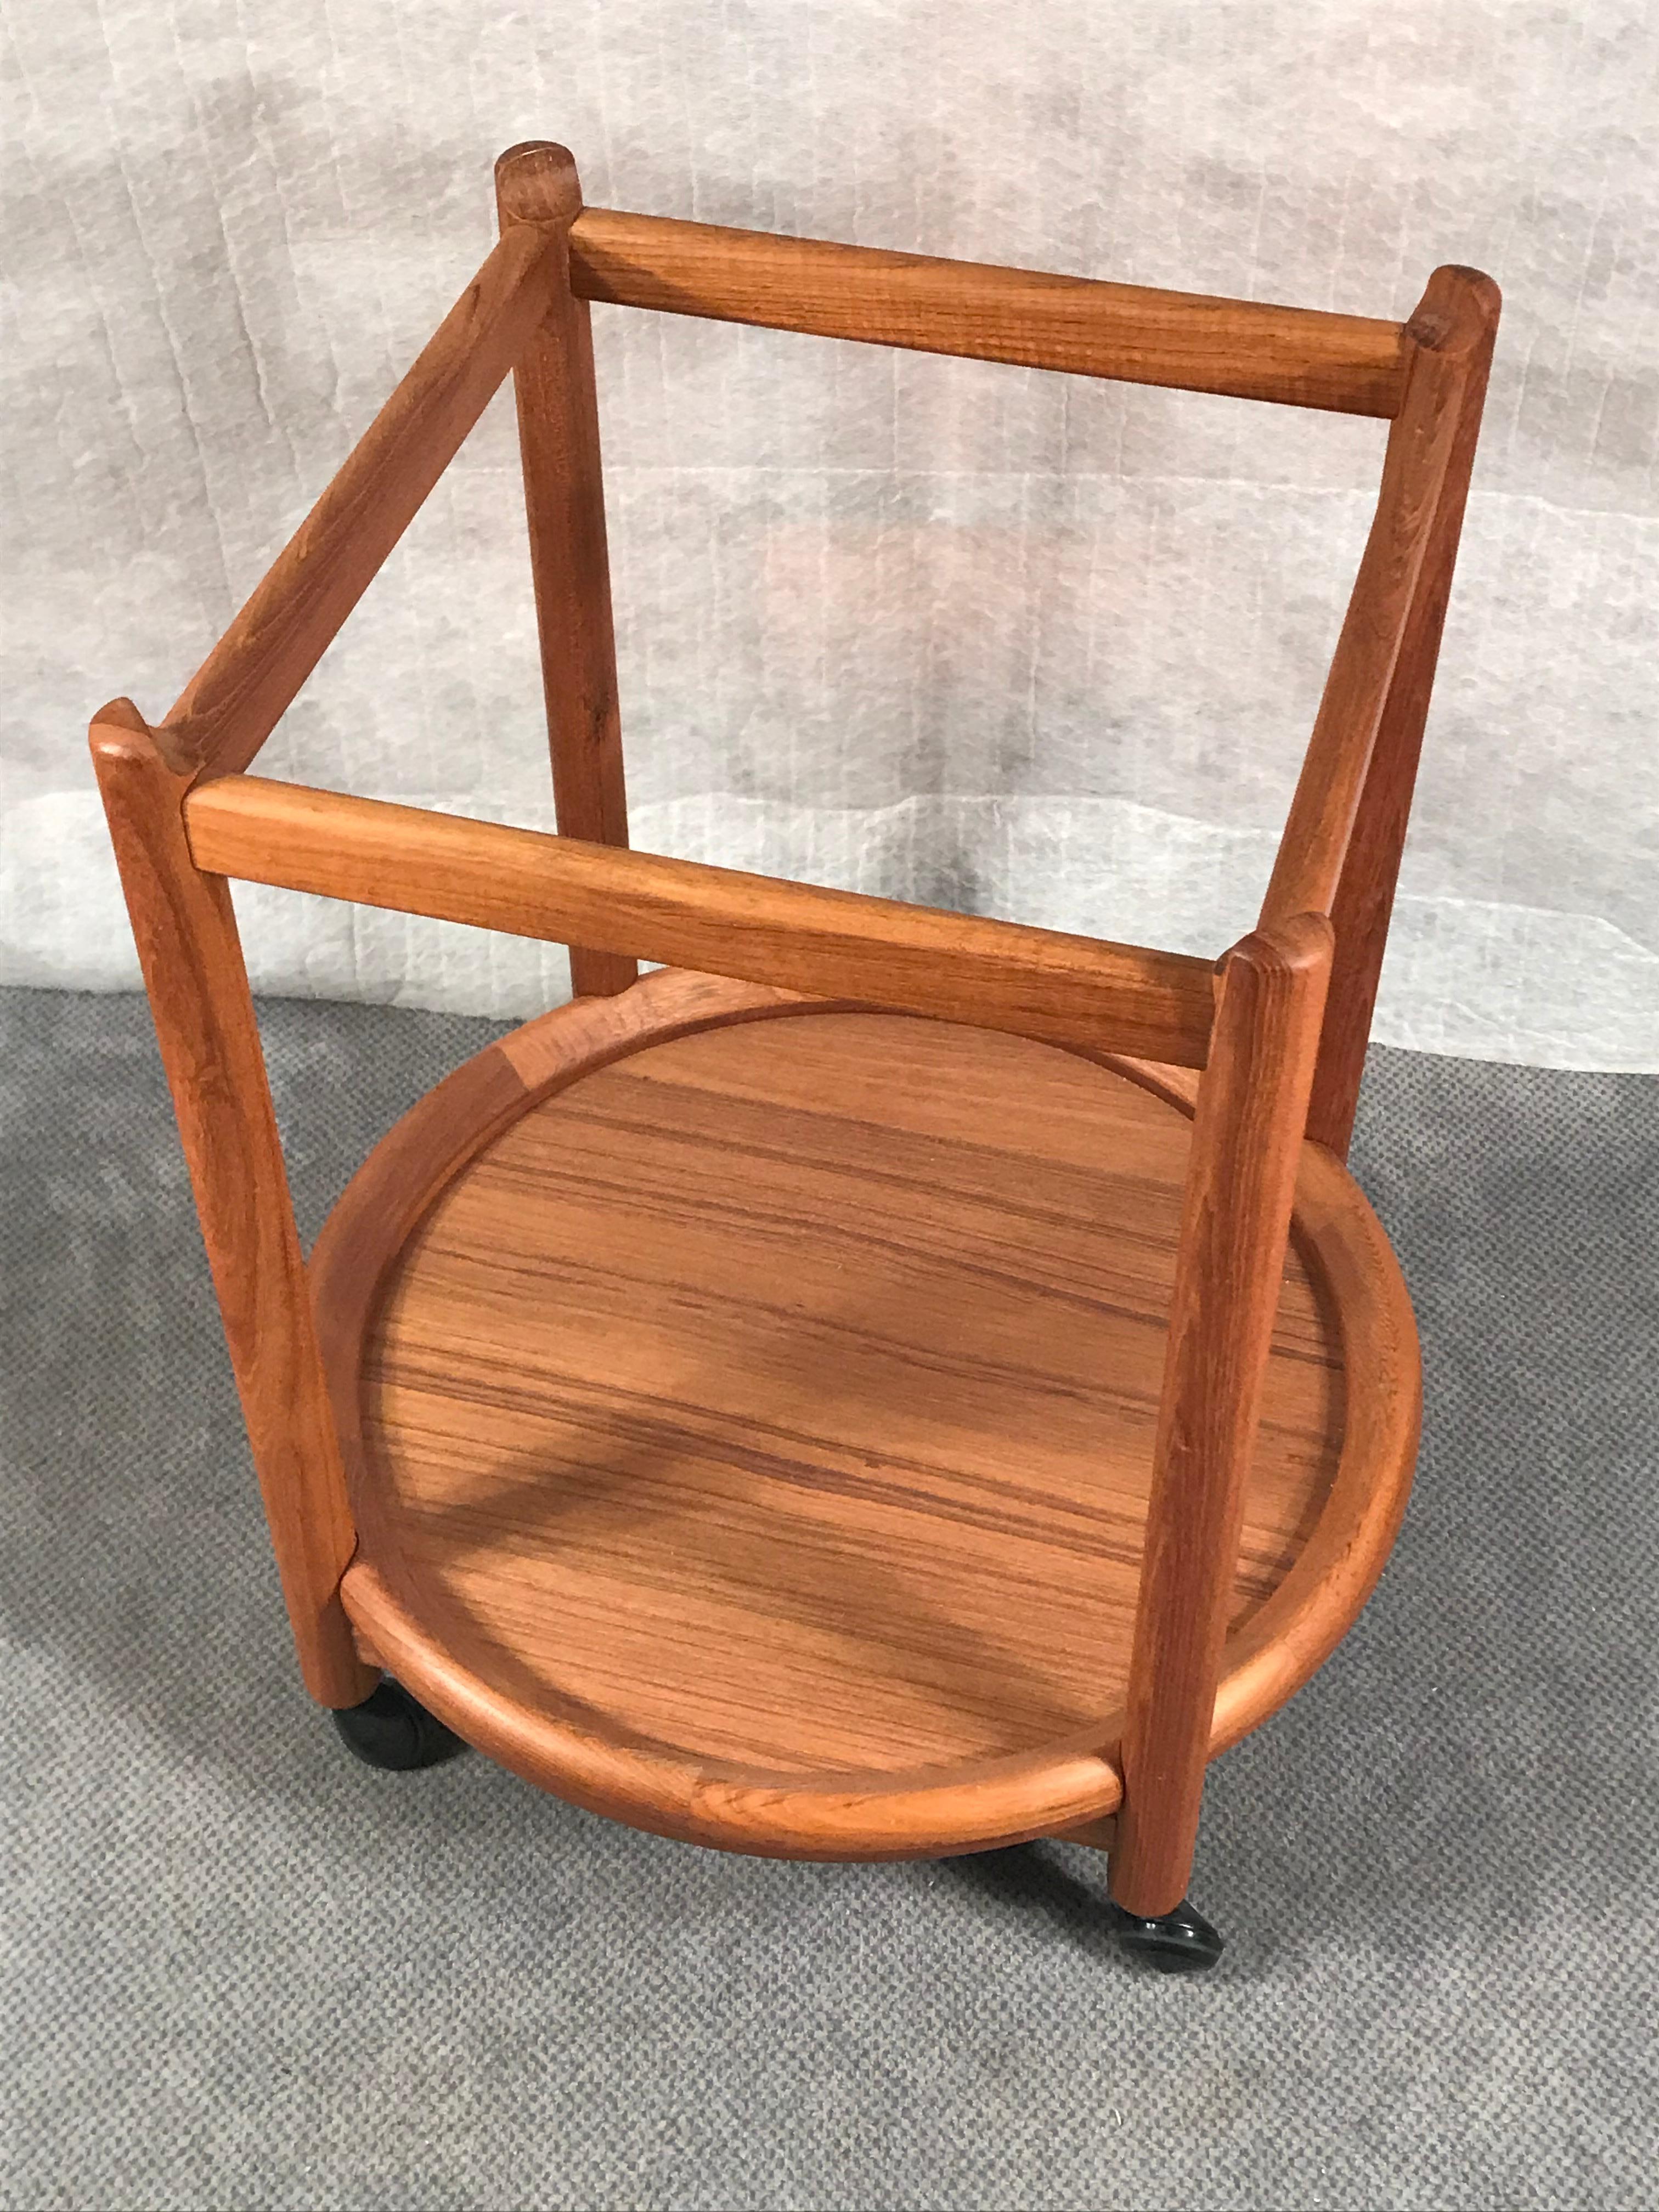 Mid century round tea or bar cart, Denmark 20th century. Teakwood. 
The small cart or side table stands on casters and has two shelves. The upper one is removable and can be used as a tray. 
The tea cart is in very good vintage condition.